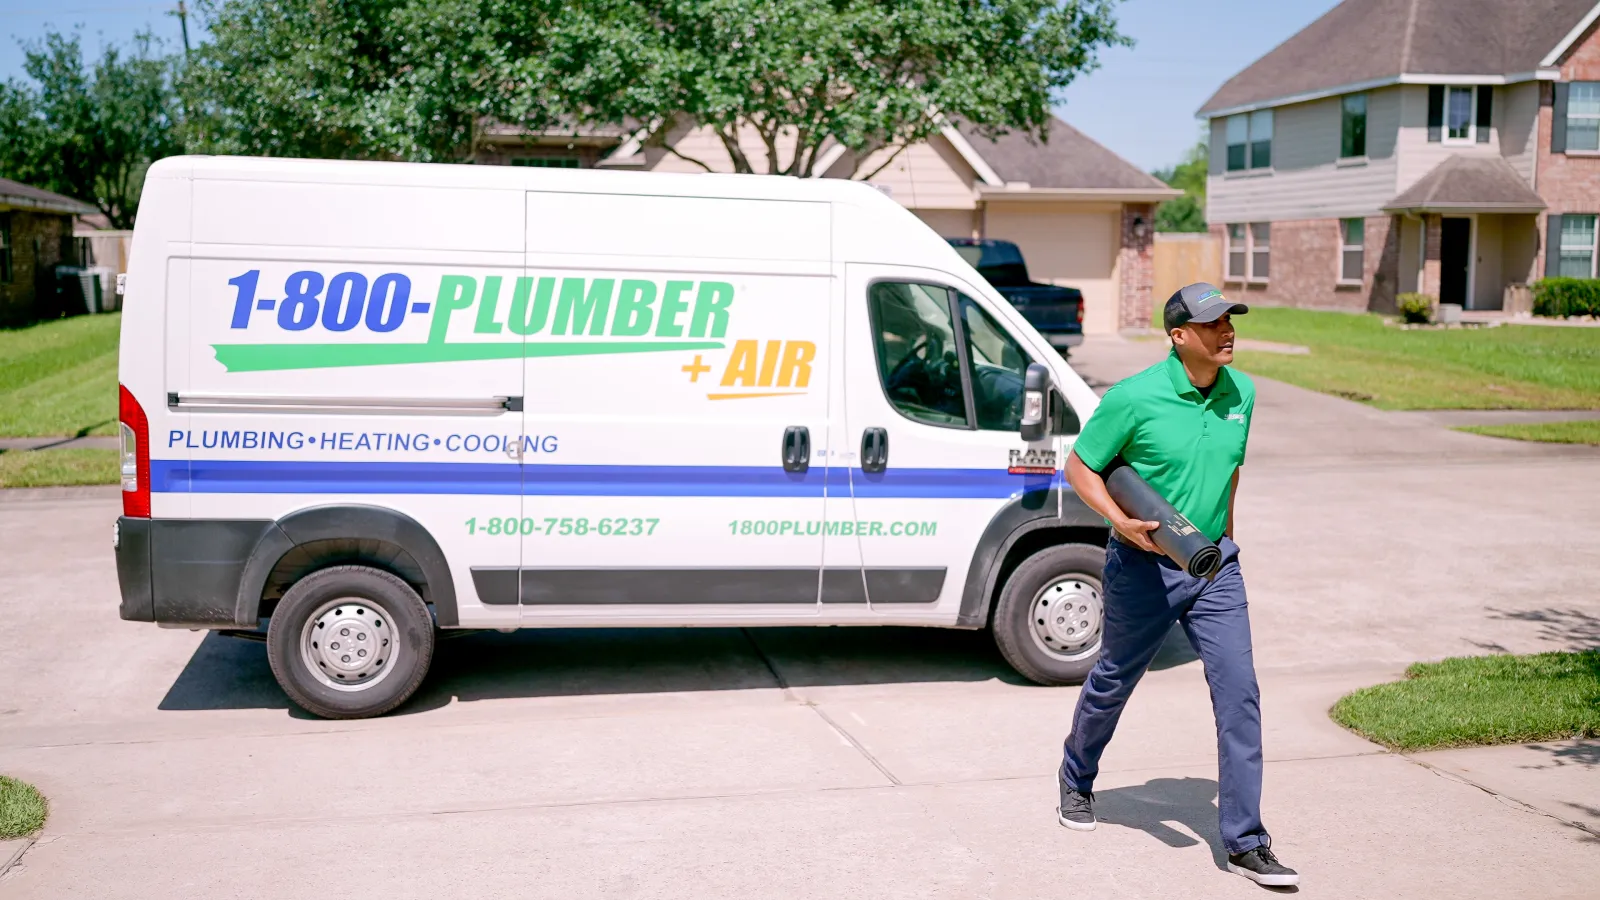 Plumber next to a truck